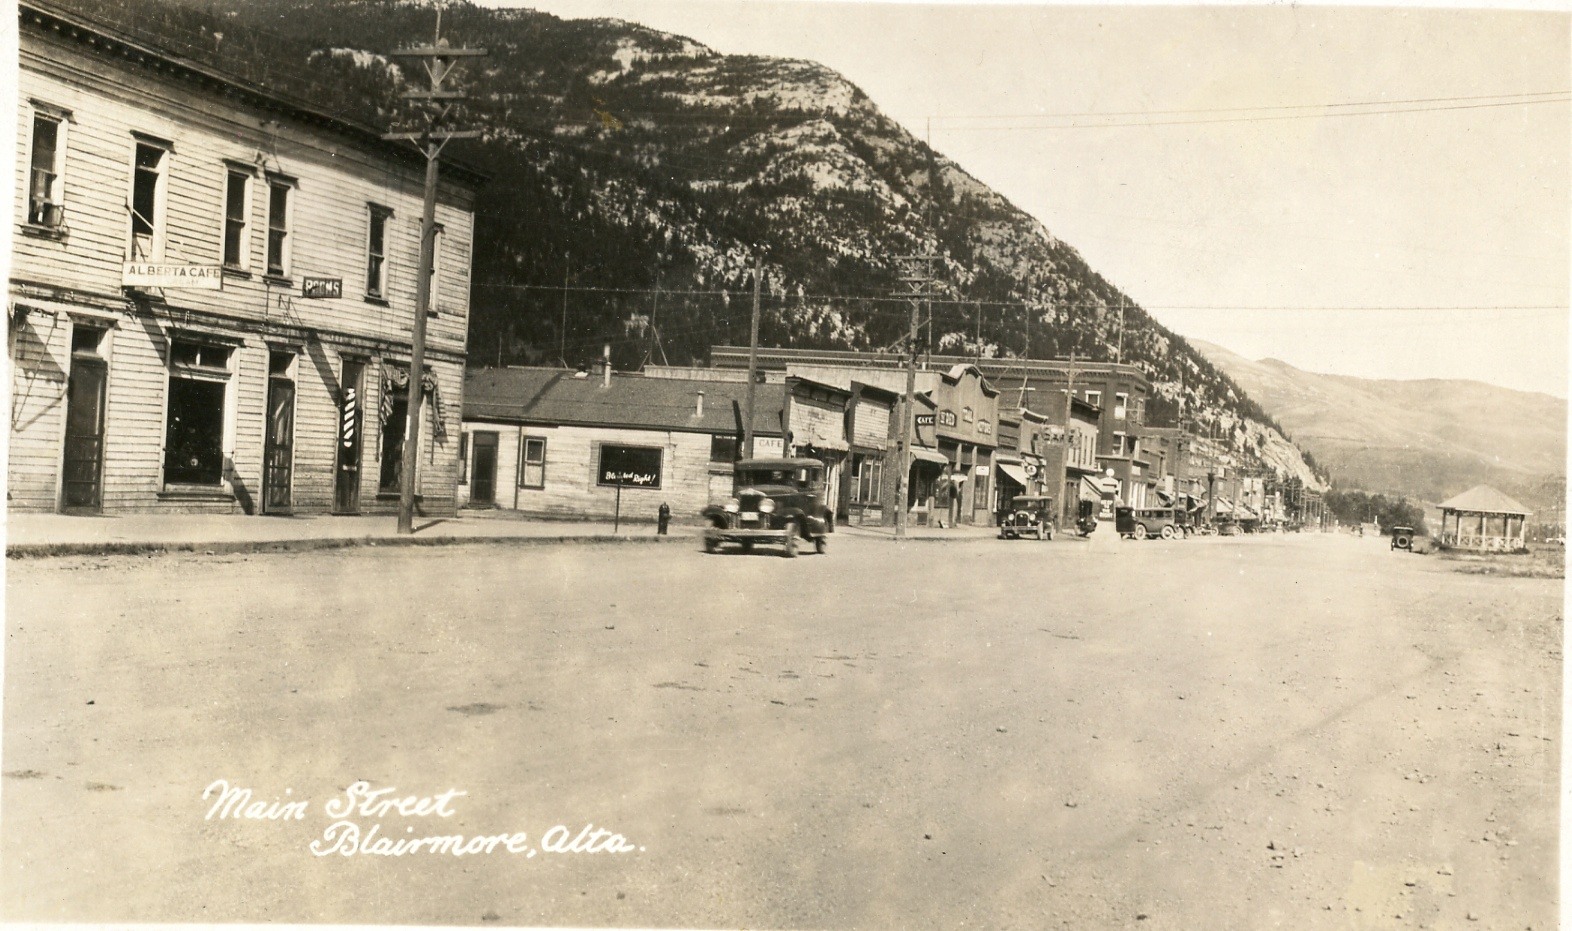 BOOTLEGGING TALE - The main street in Blairmore